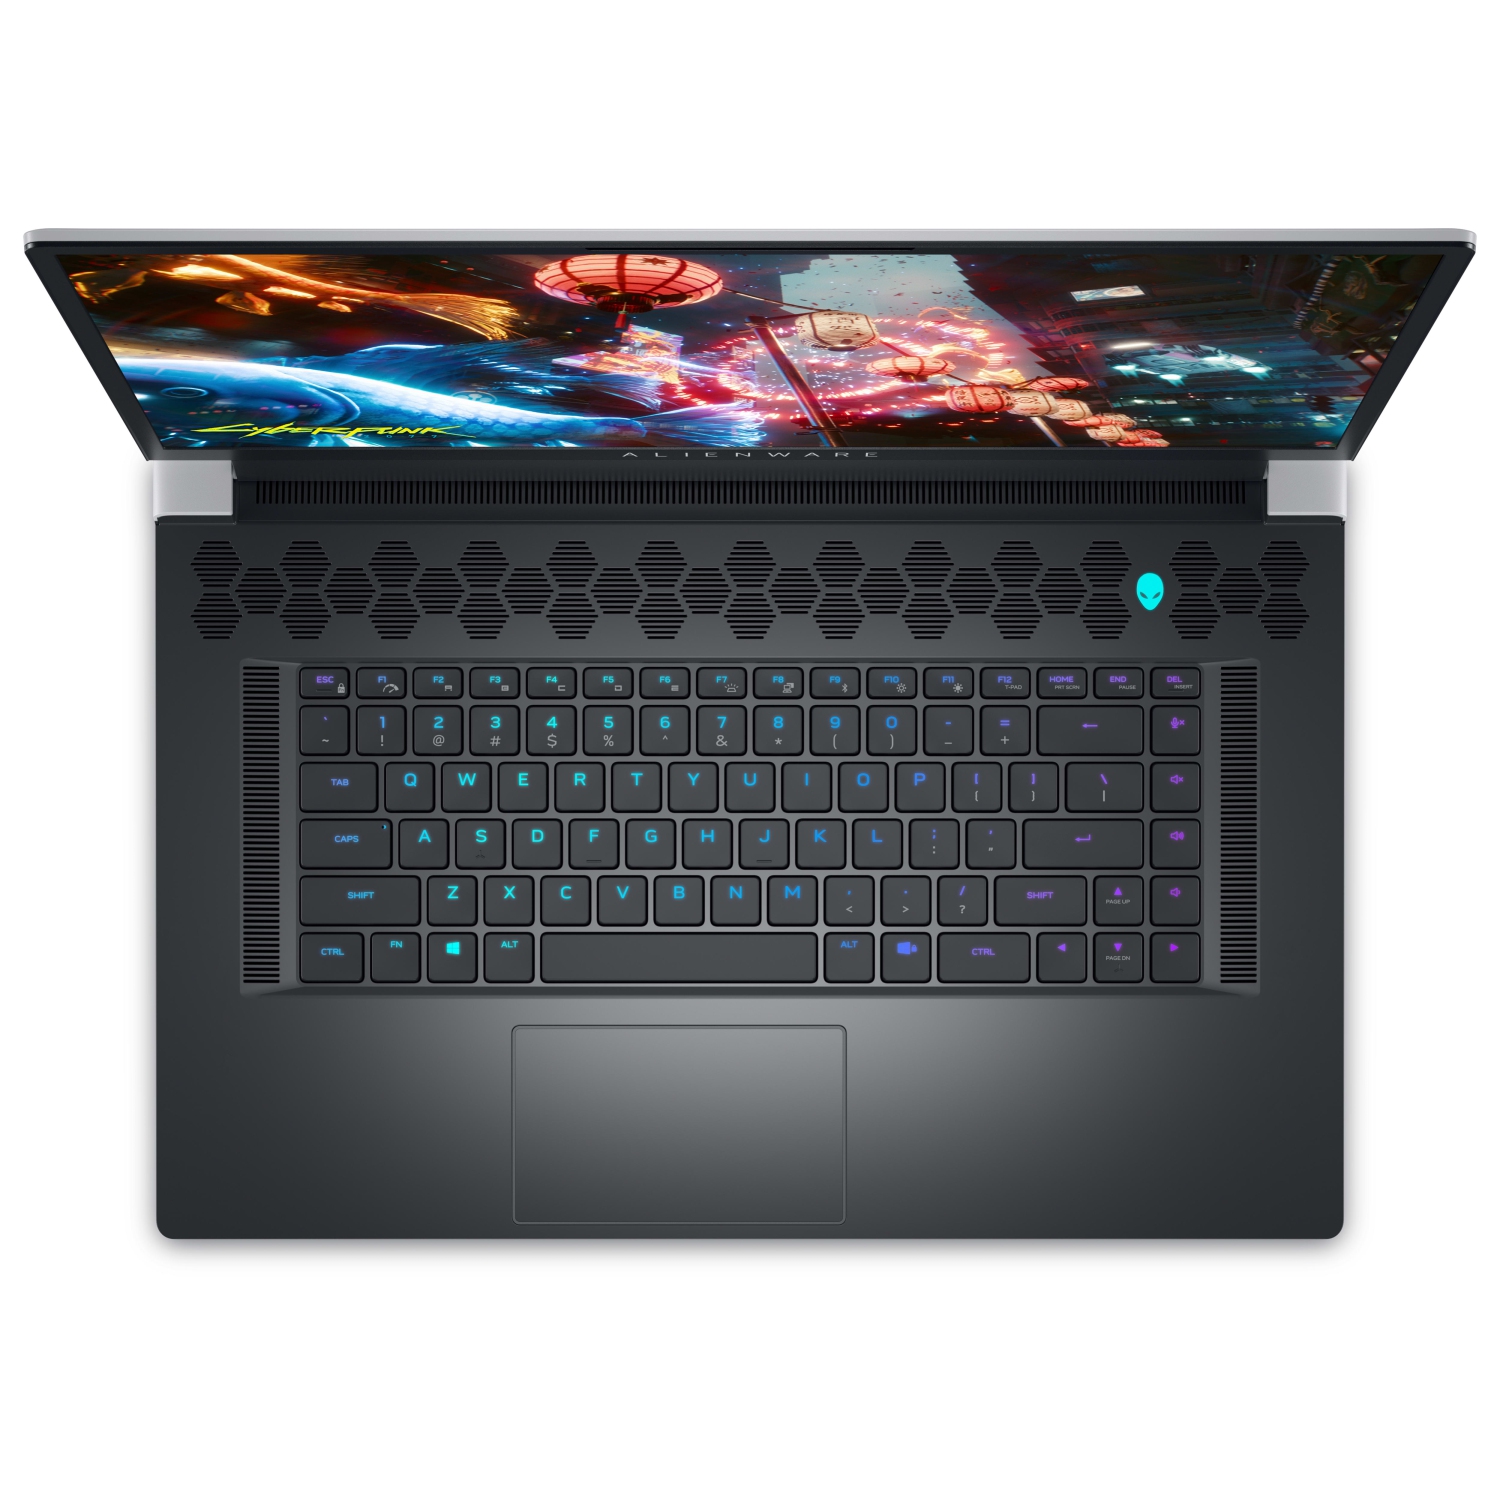 Refurbished (Excellent) – Dell Alienware X17 R2 Gaming Laptop (2022) | 17.3" FHD | Core i9 - 2TB SSD - 16GB RAM - 3080 Ti | 14 Cores @ 5 GHz - 12th Gen CPU - 12GB GDDR6X